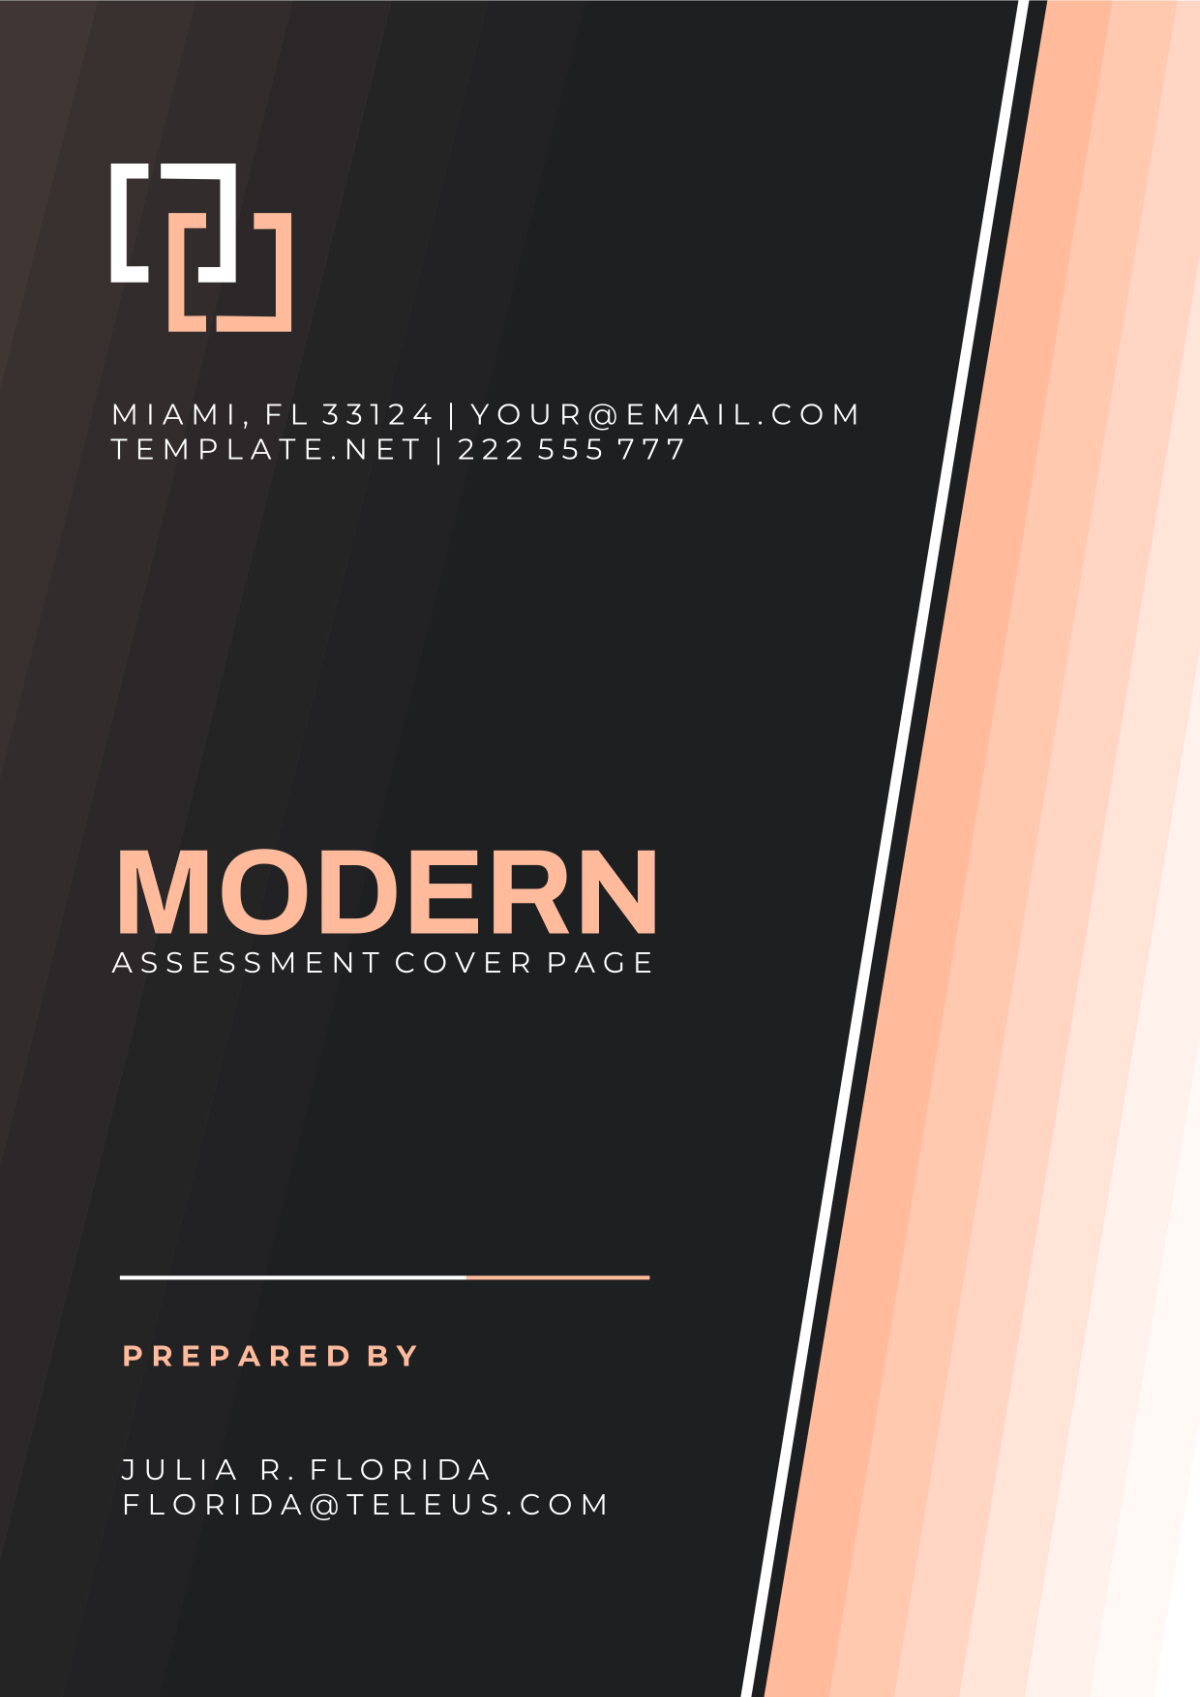 Modern Assessment Cover Page